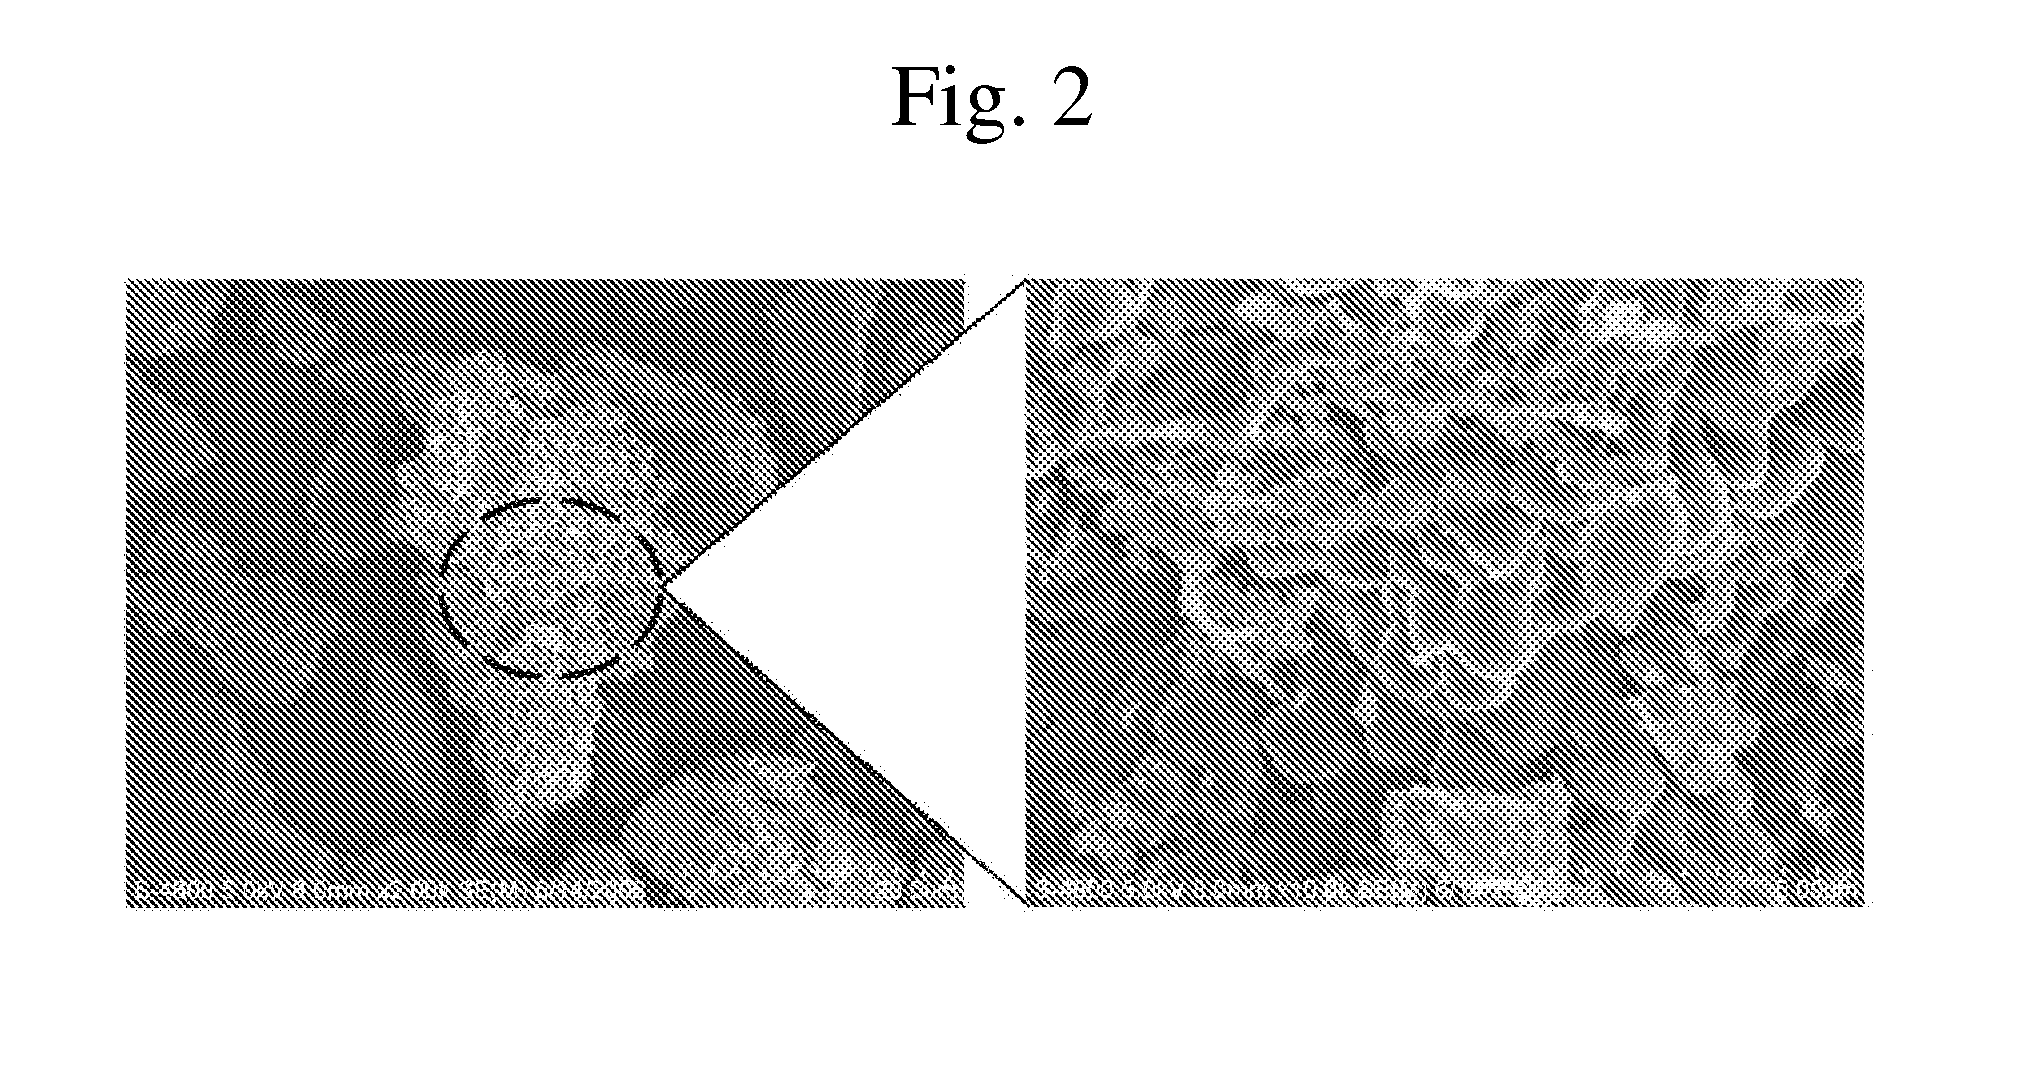 Electrode active material for secondary battery and method for preparing the same